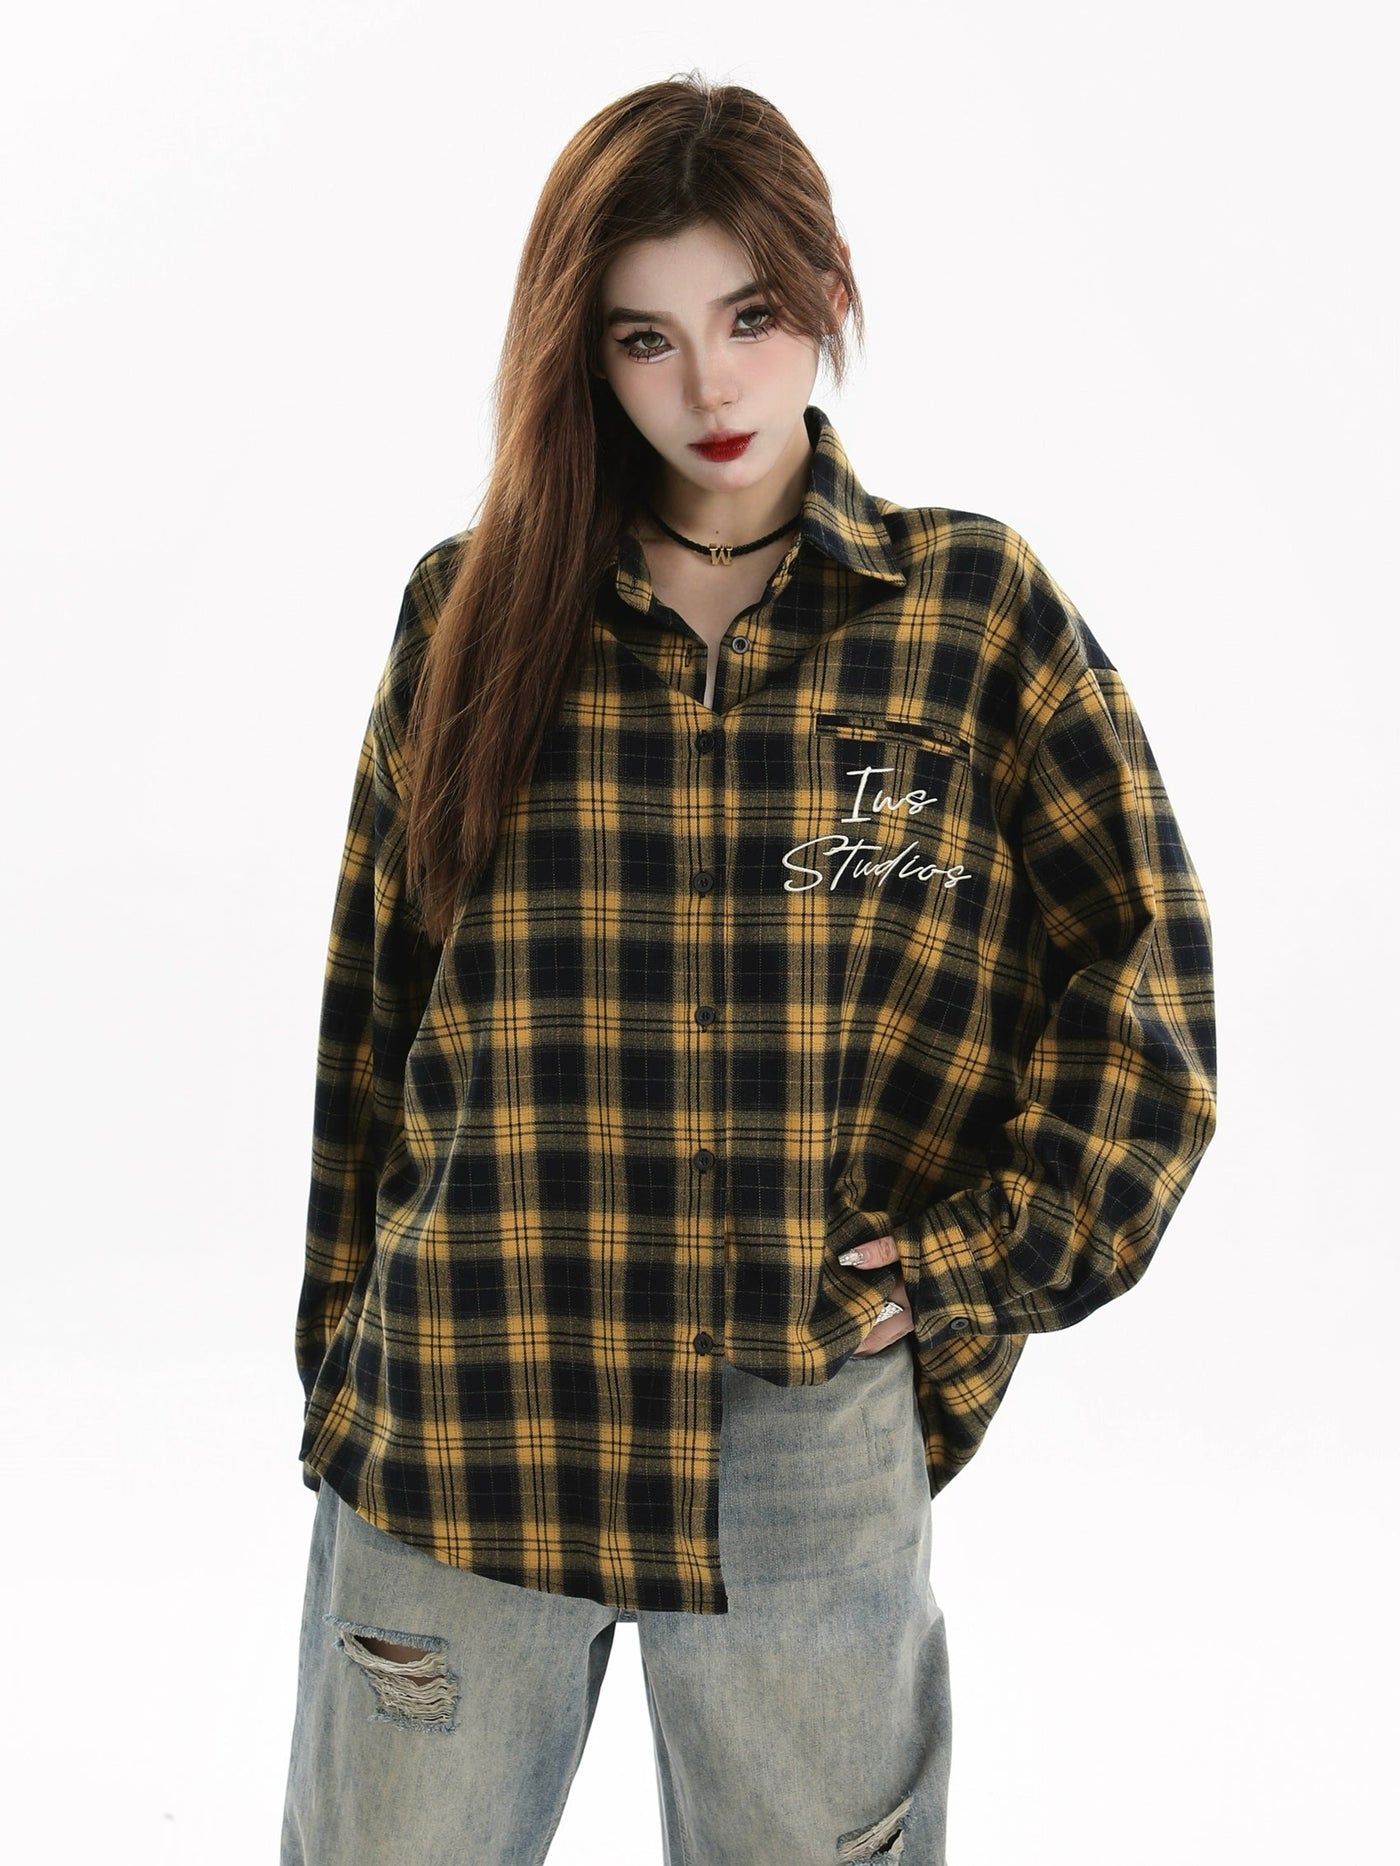 Classic Embroidered Plaid Shirt Korean Street Fashion Shirt By INS Korea Shop Online at OH Vault